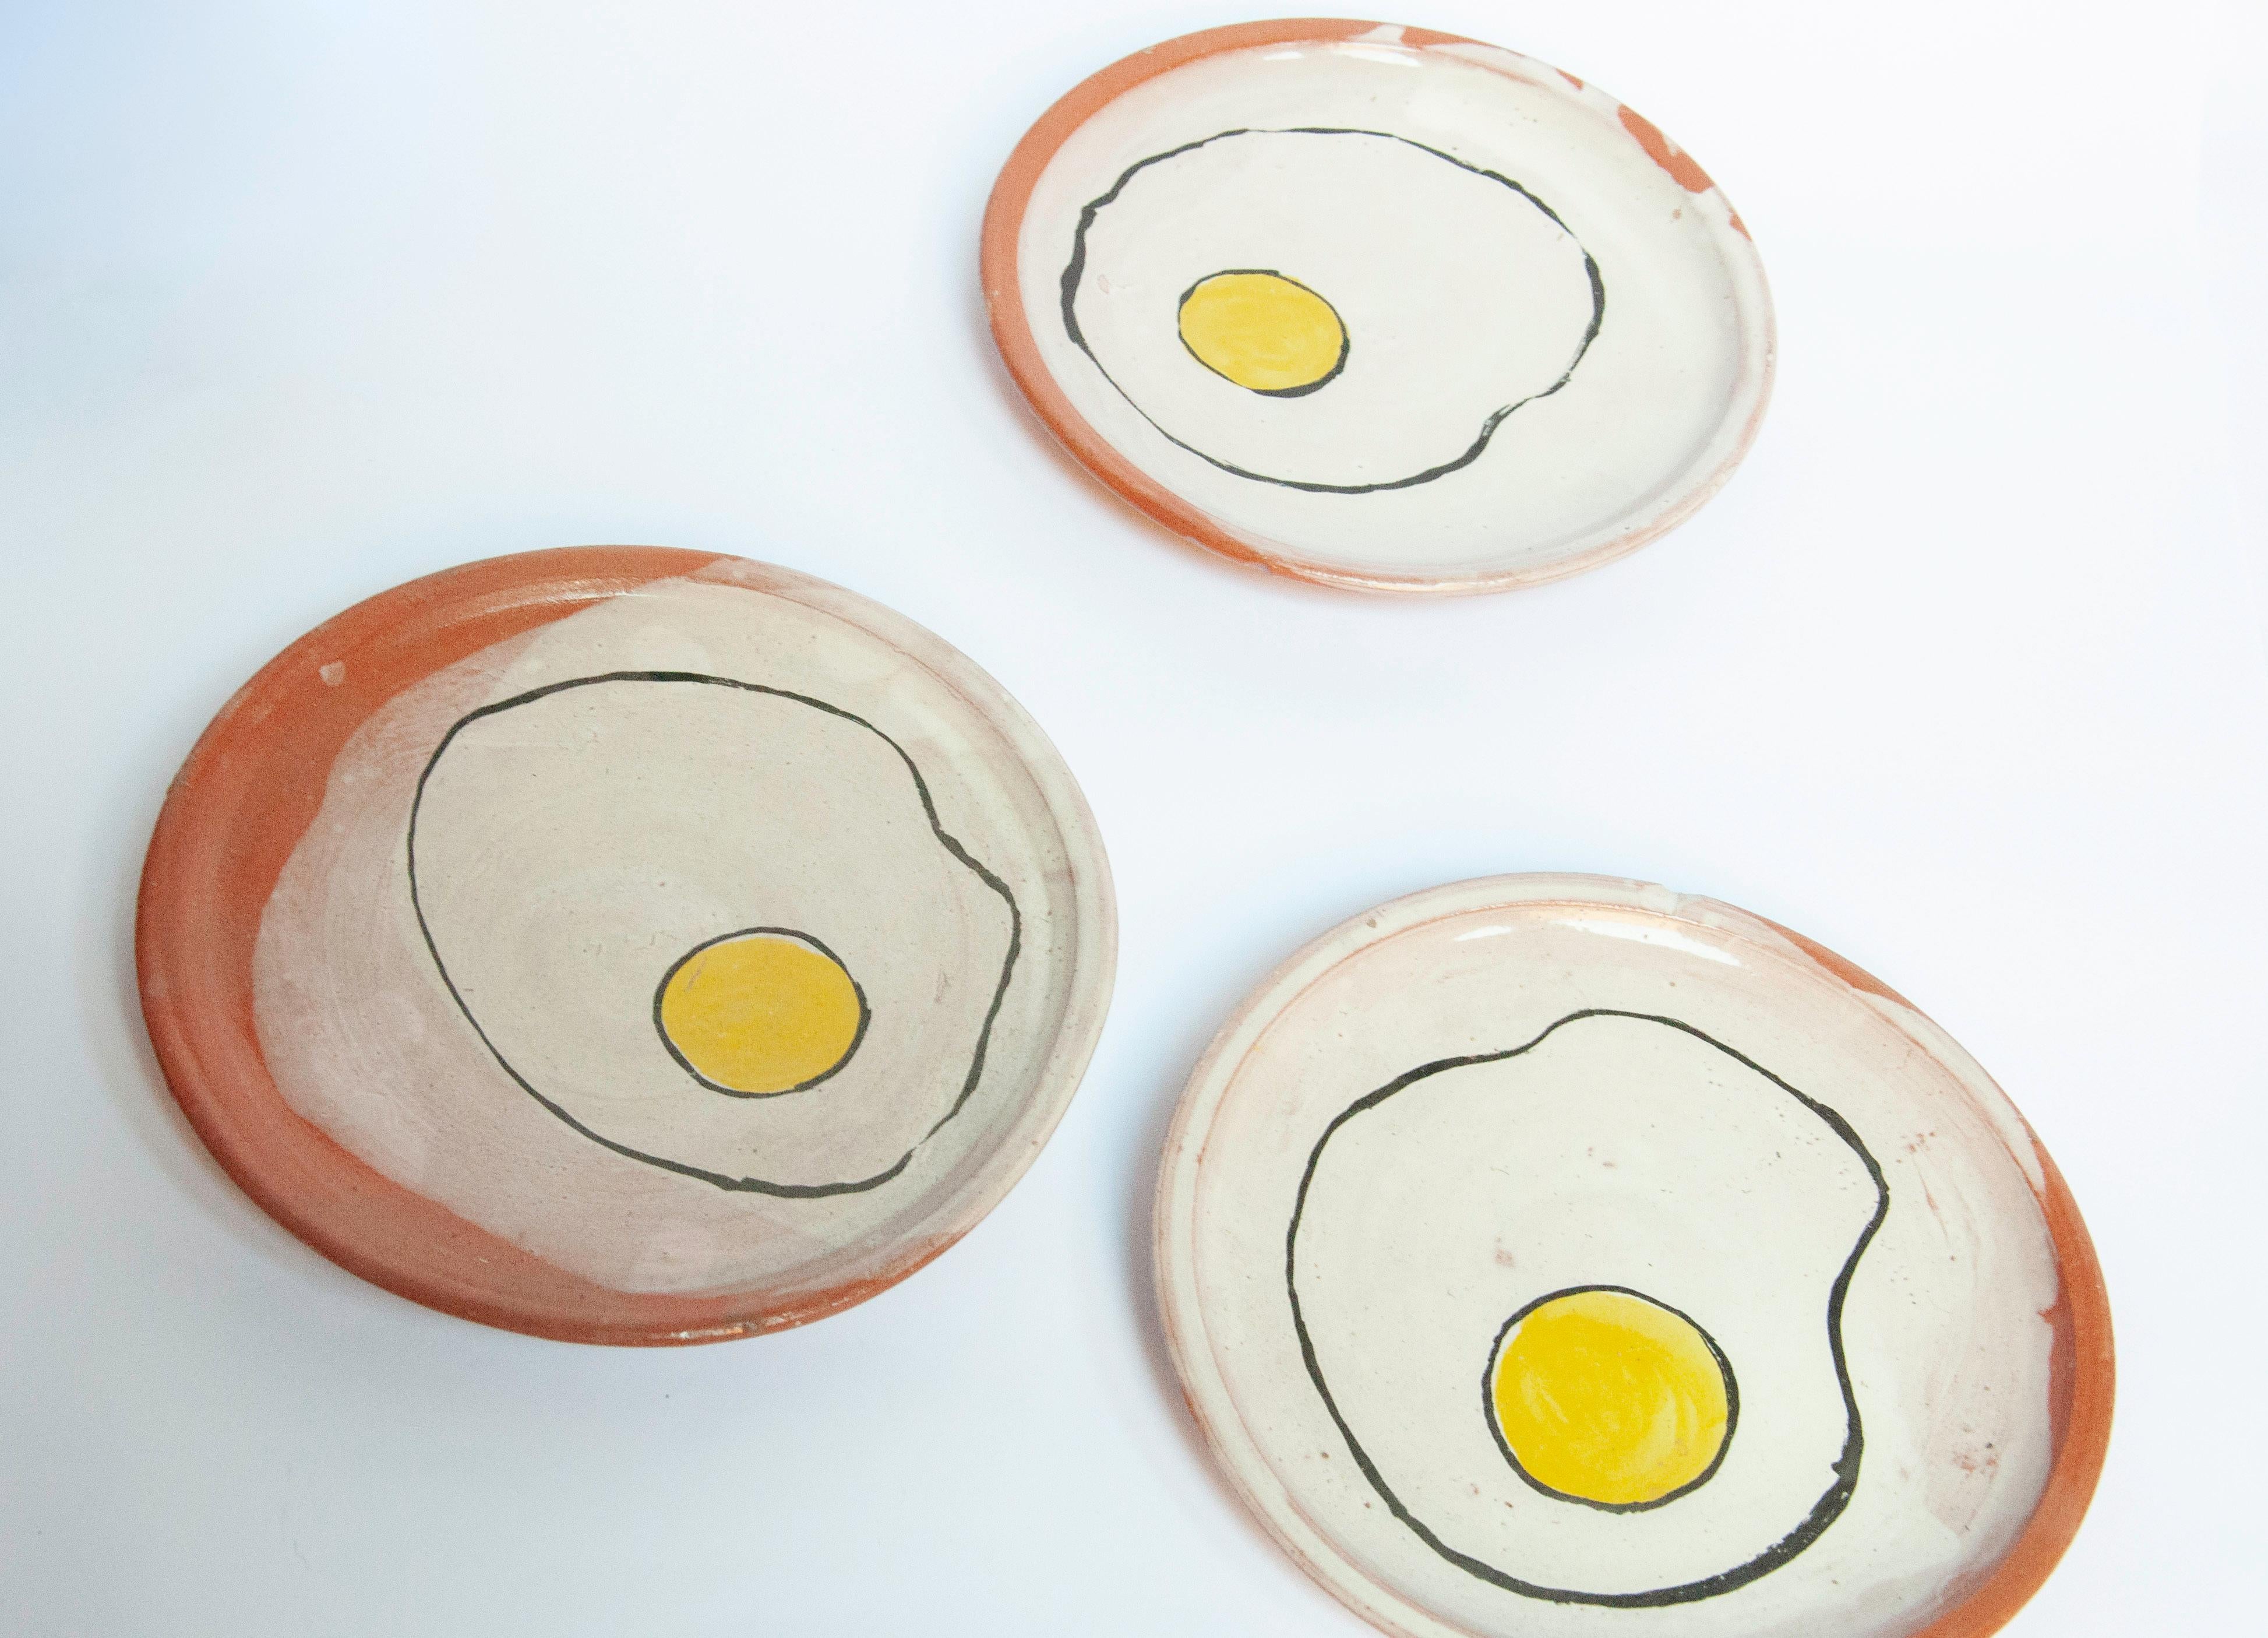 Ceramic four-plate set with modern egg design by Lorenzo Lorenzzo. 

Lorenzo's work alludes to his favourite meal, breakfast, creating a contemporary design for this plate collection.